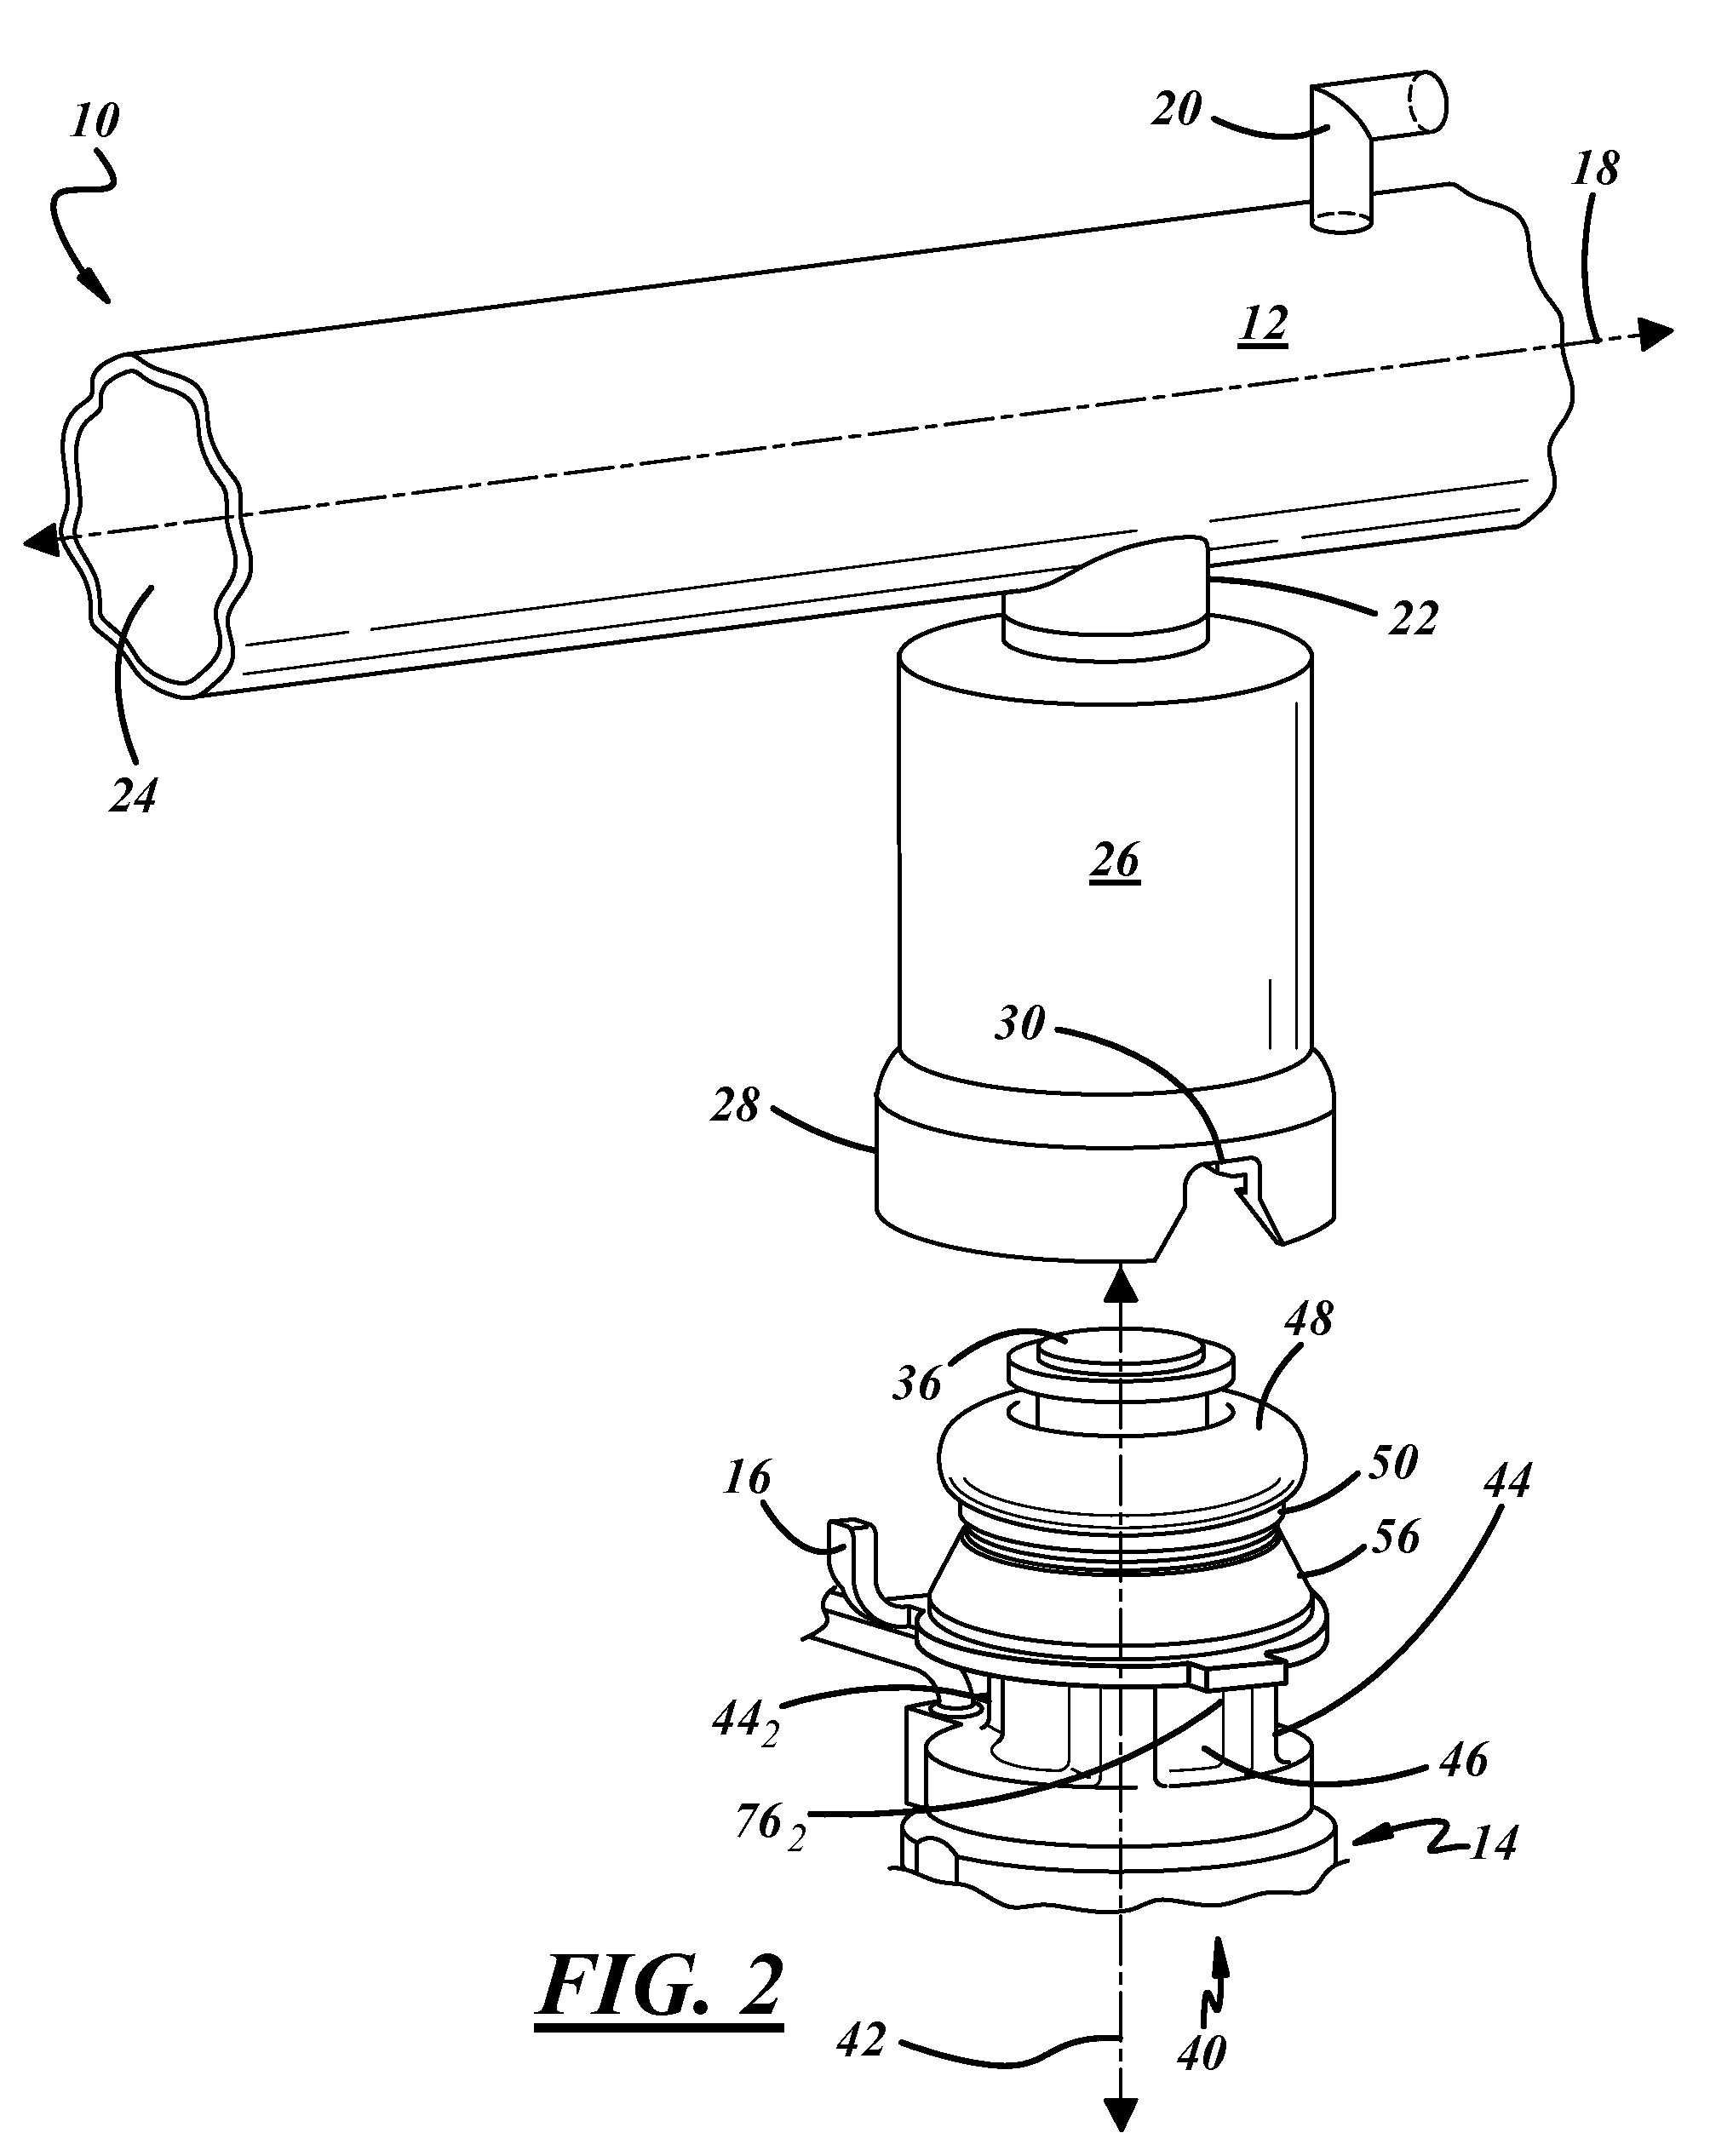 Attachment for fuel injectors in direct injection fuel systems